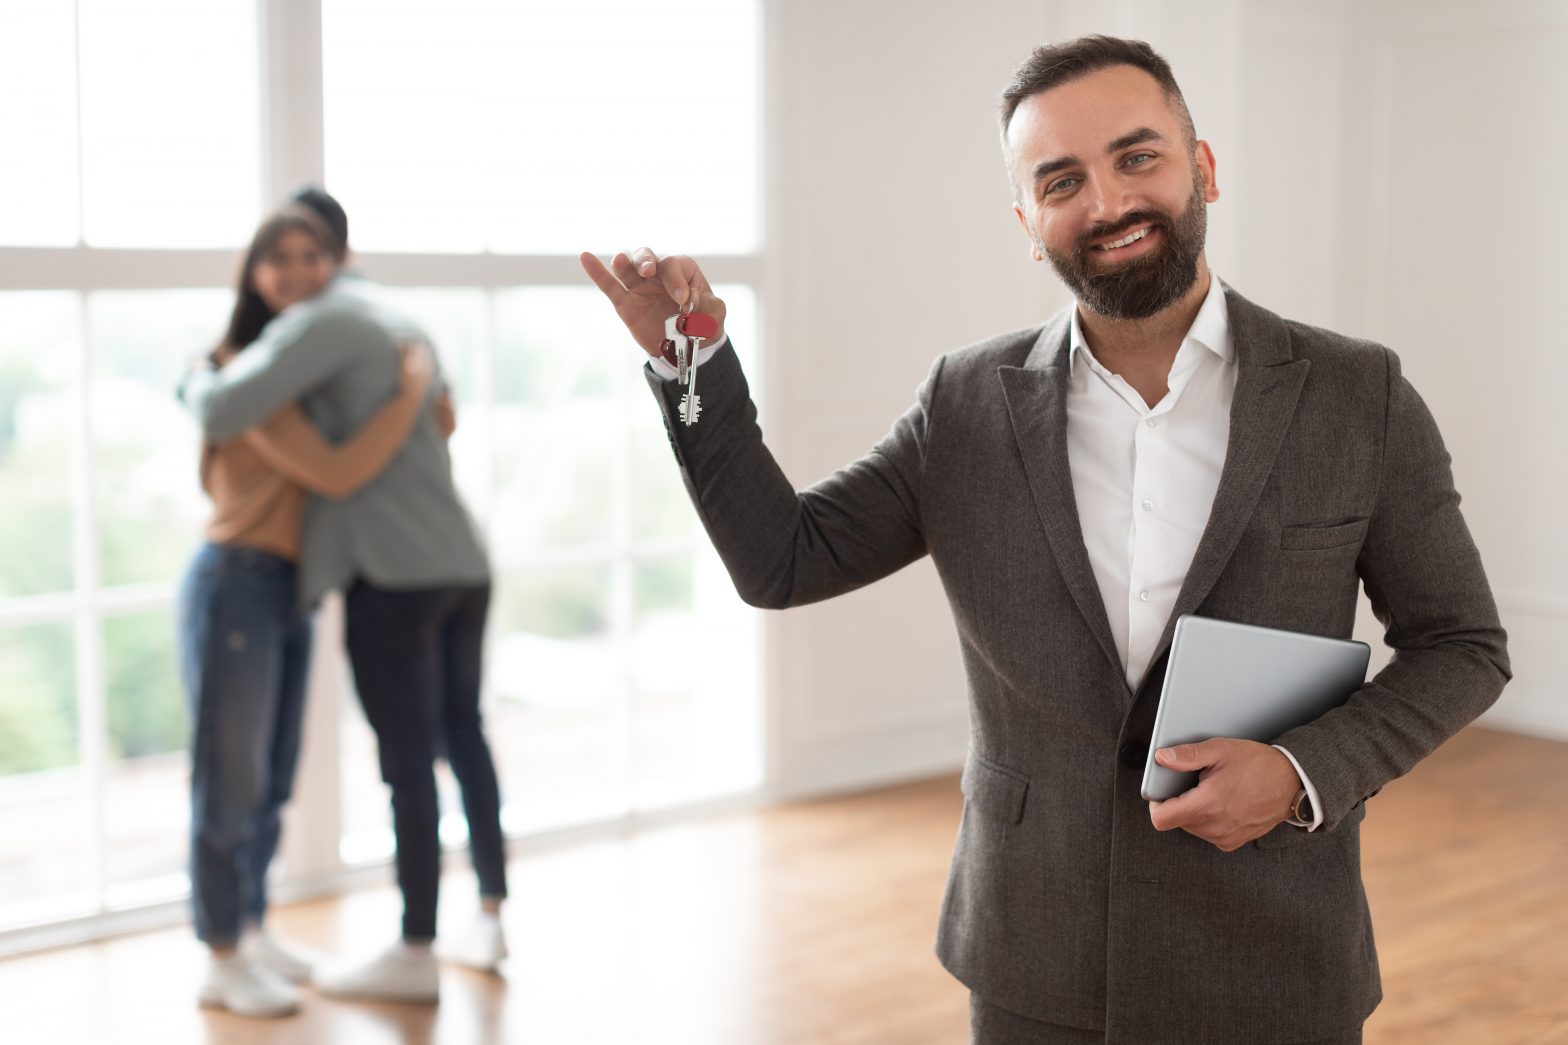 House Ownership. Portrait Of Smiling Professional Real Estate Agent In Suit Holding And Showing Key To Camera, Selective Focus. Happy Spouses Embracing Standing In New Home In Blurred Background